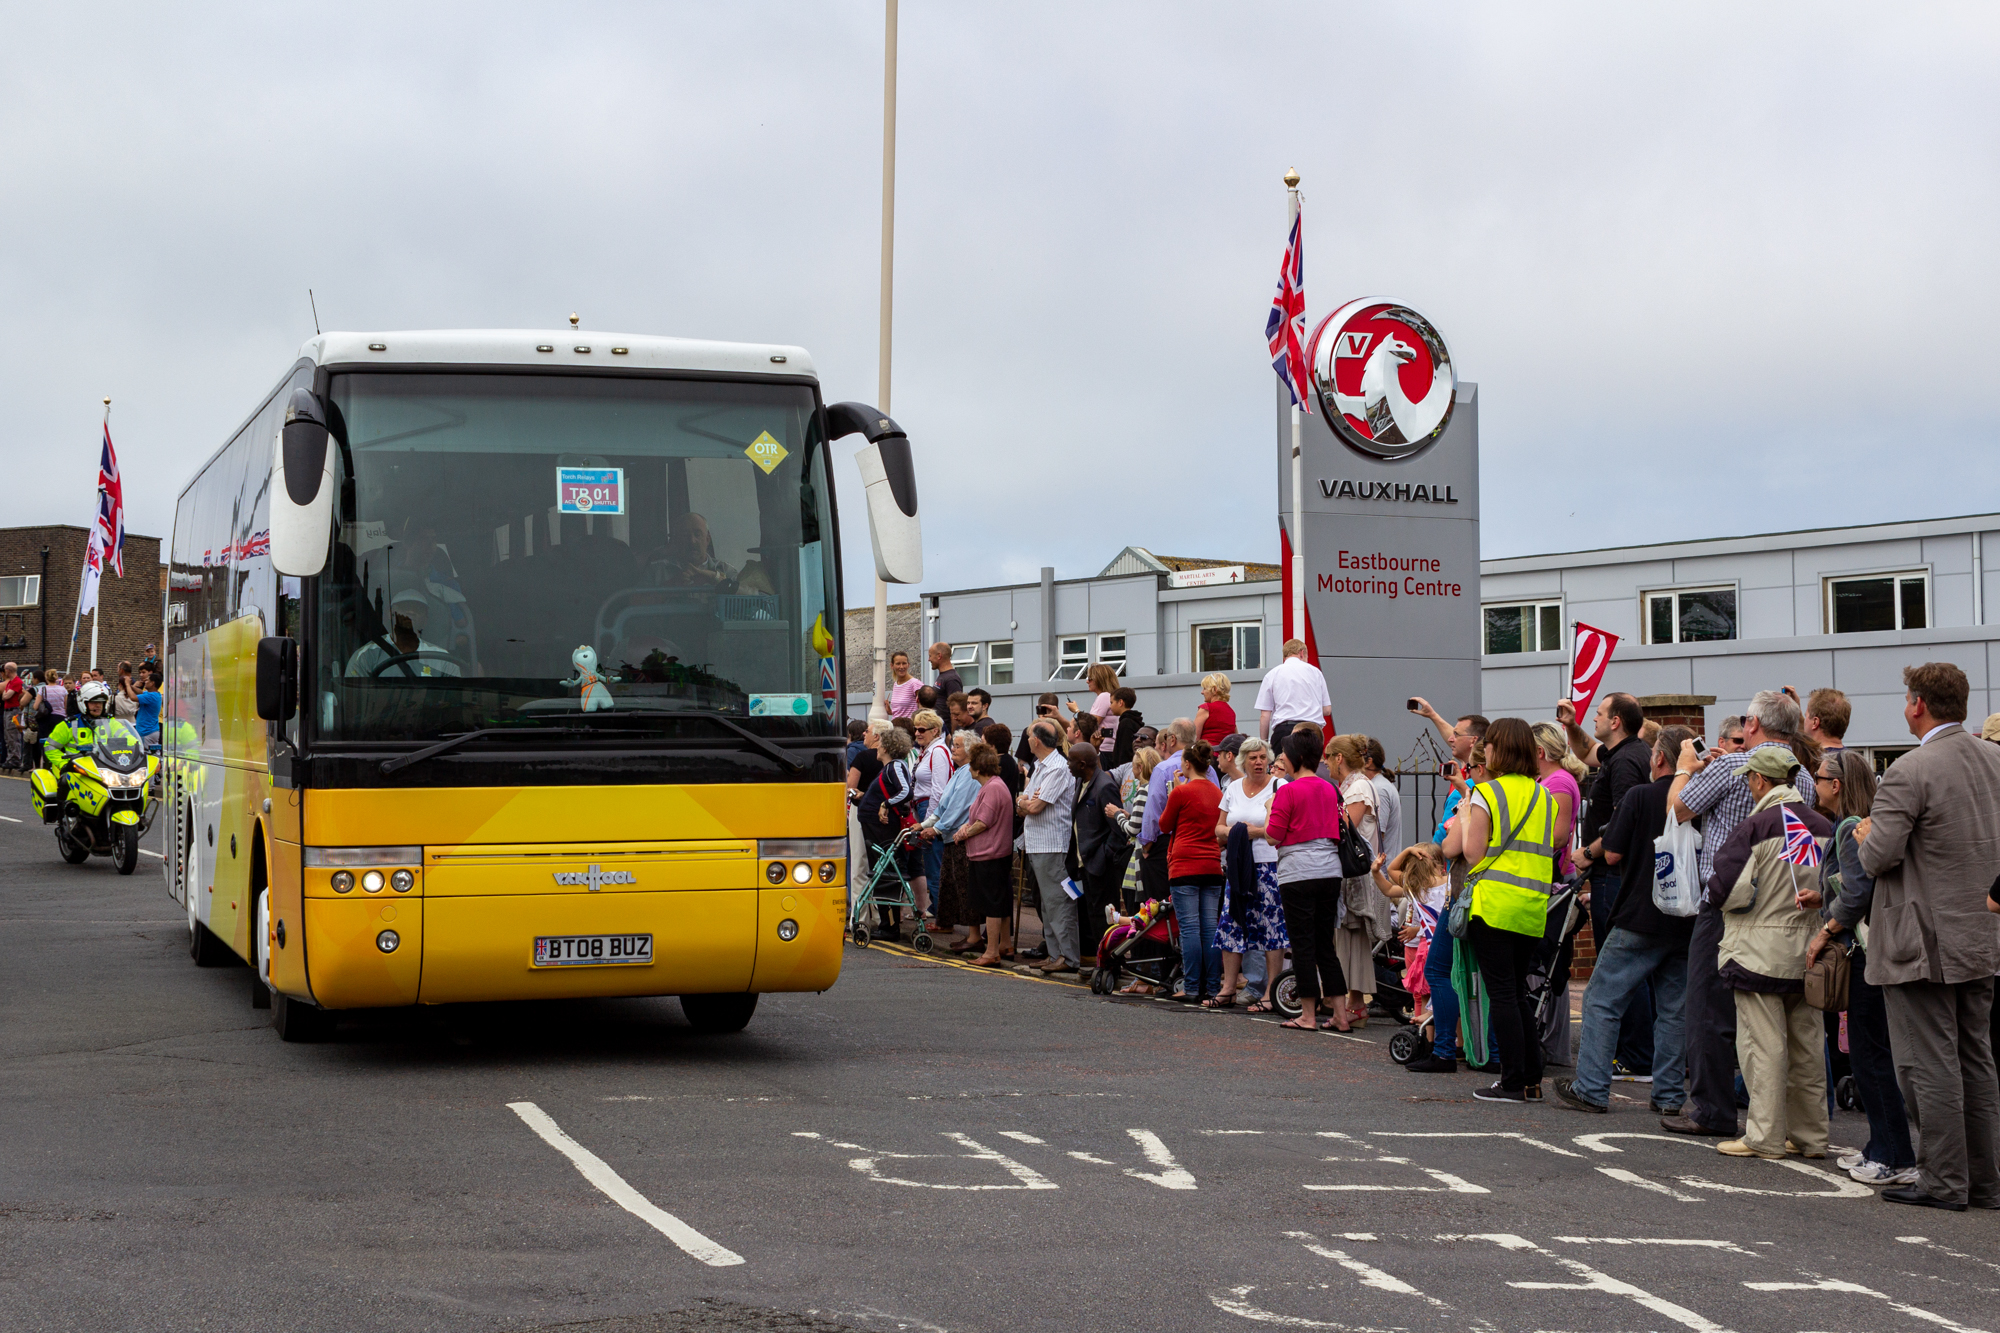 Olympic Torch Relay 2012 Bus